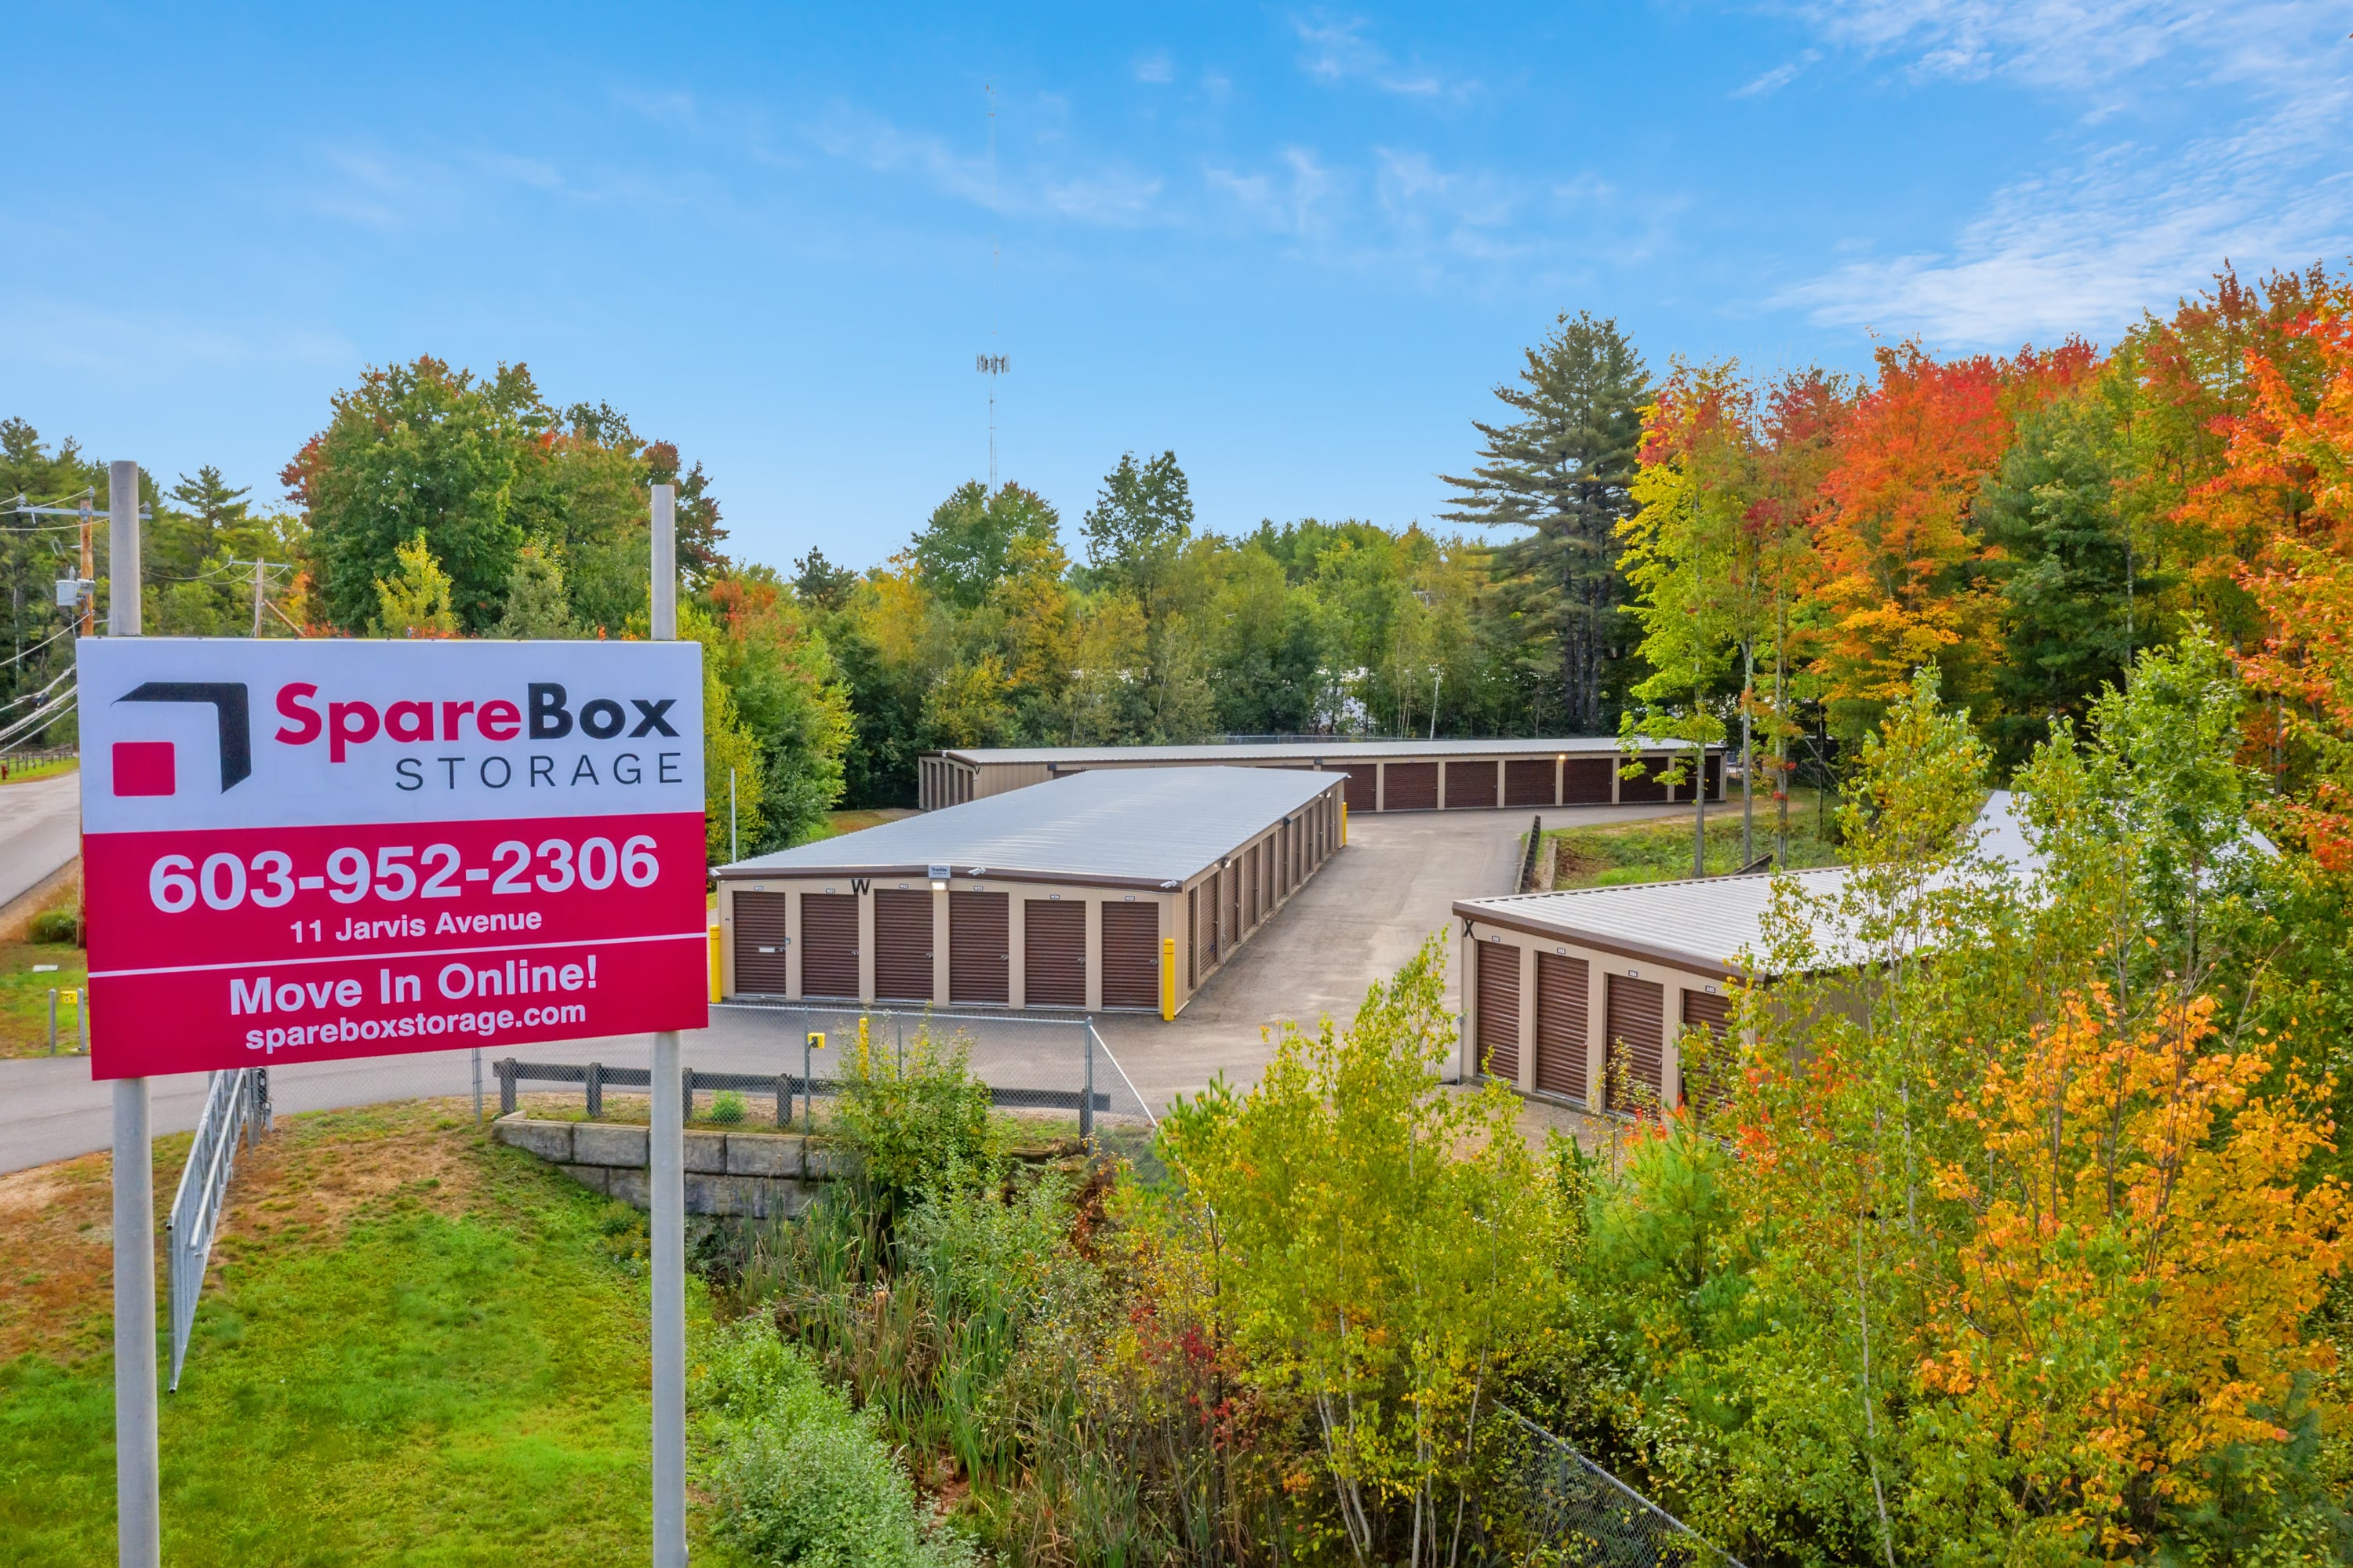 SpareBox Storage has self-storage in Rochester, NH, with many options to meet all storage needs | SpareBox Storage